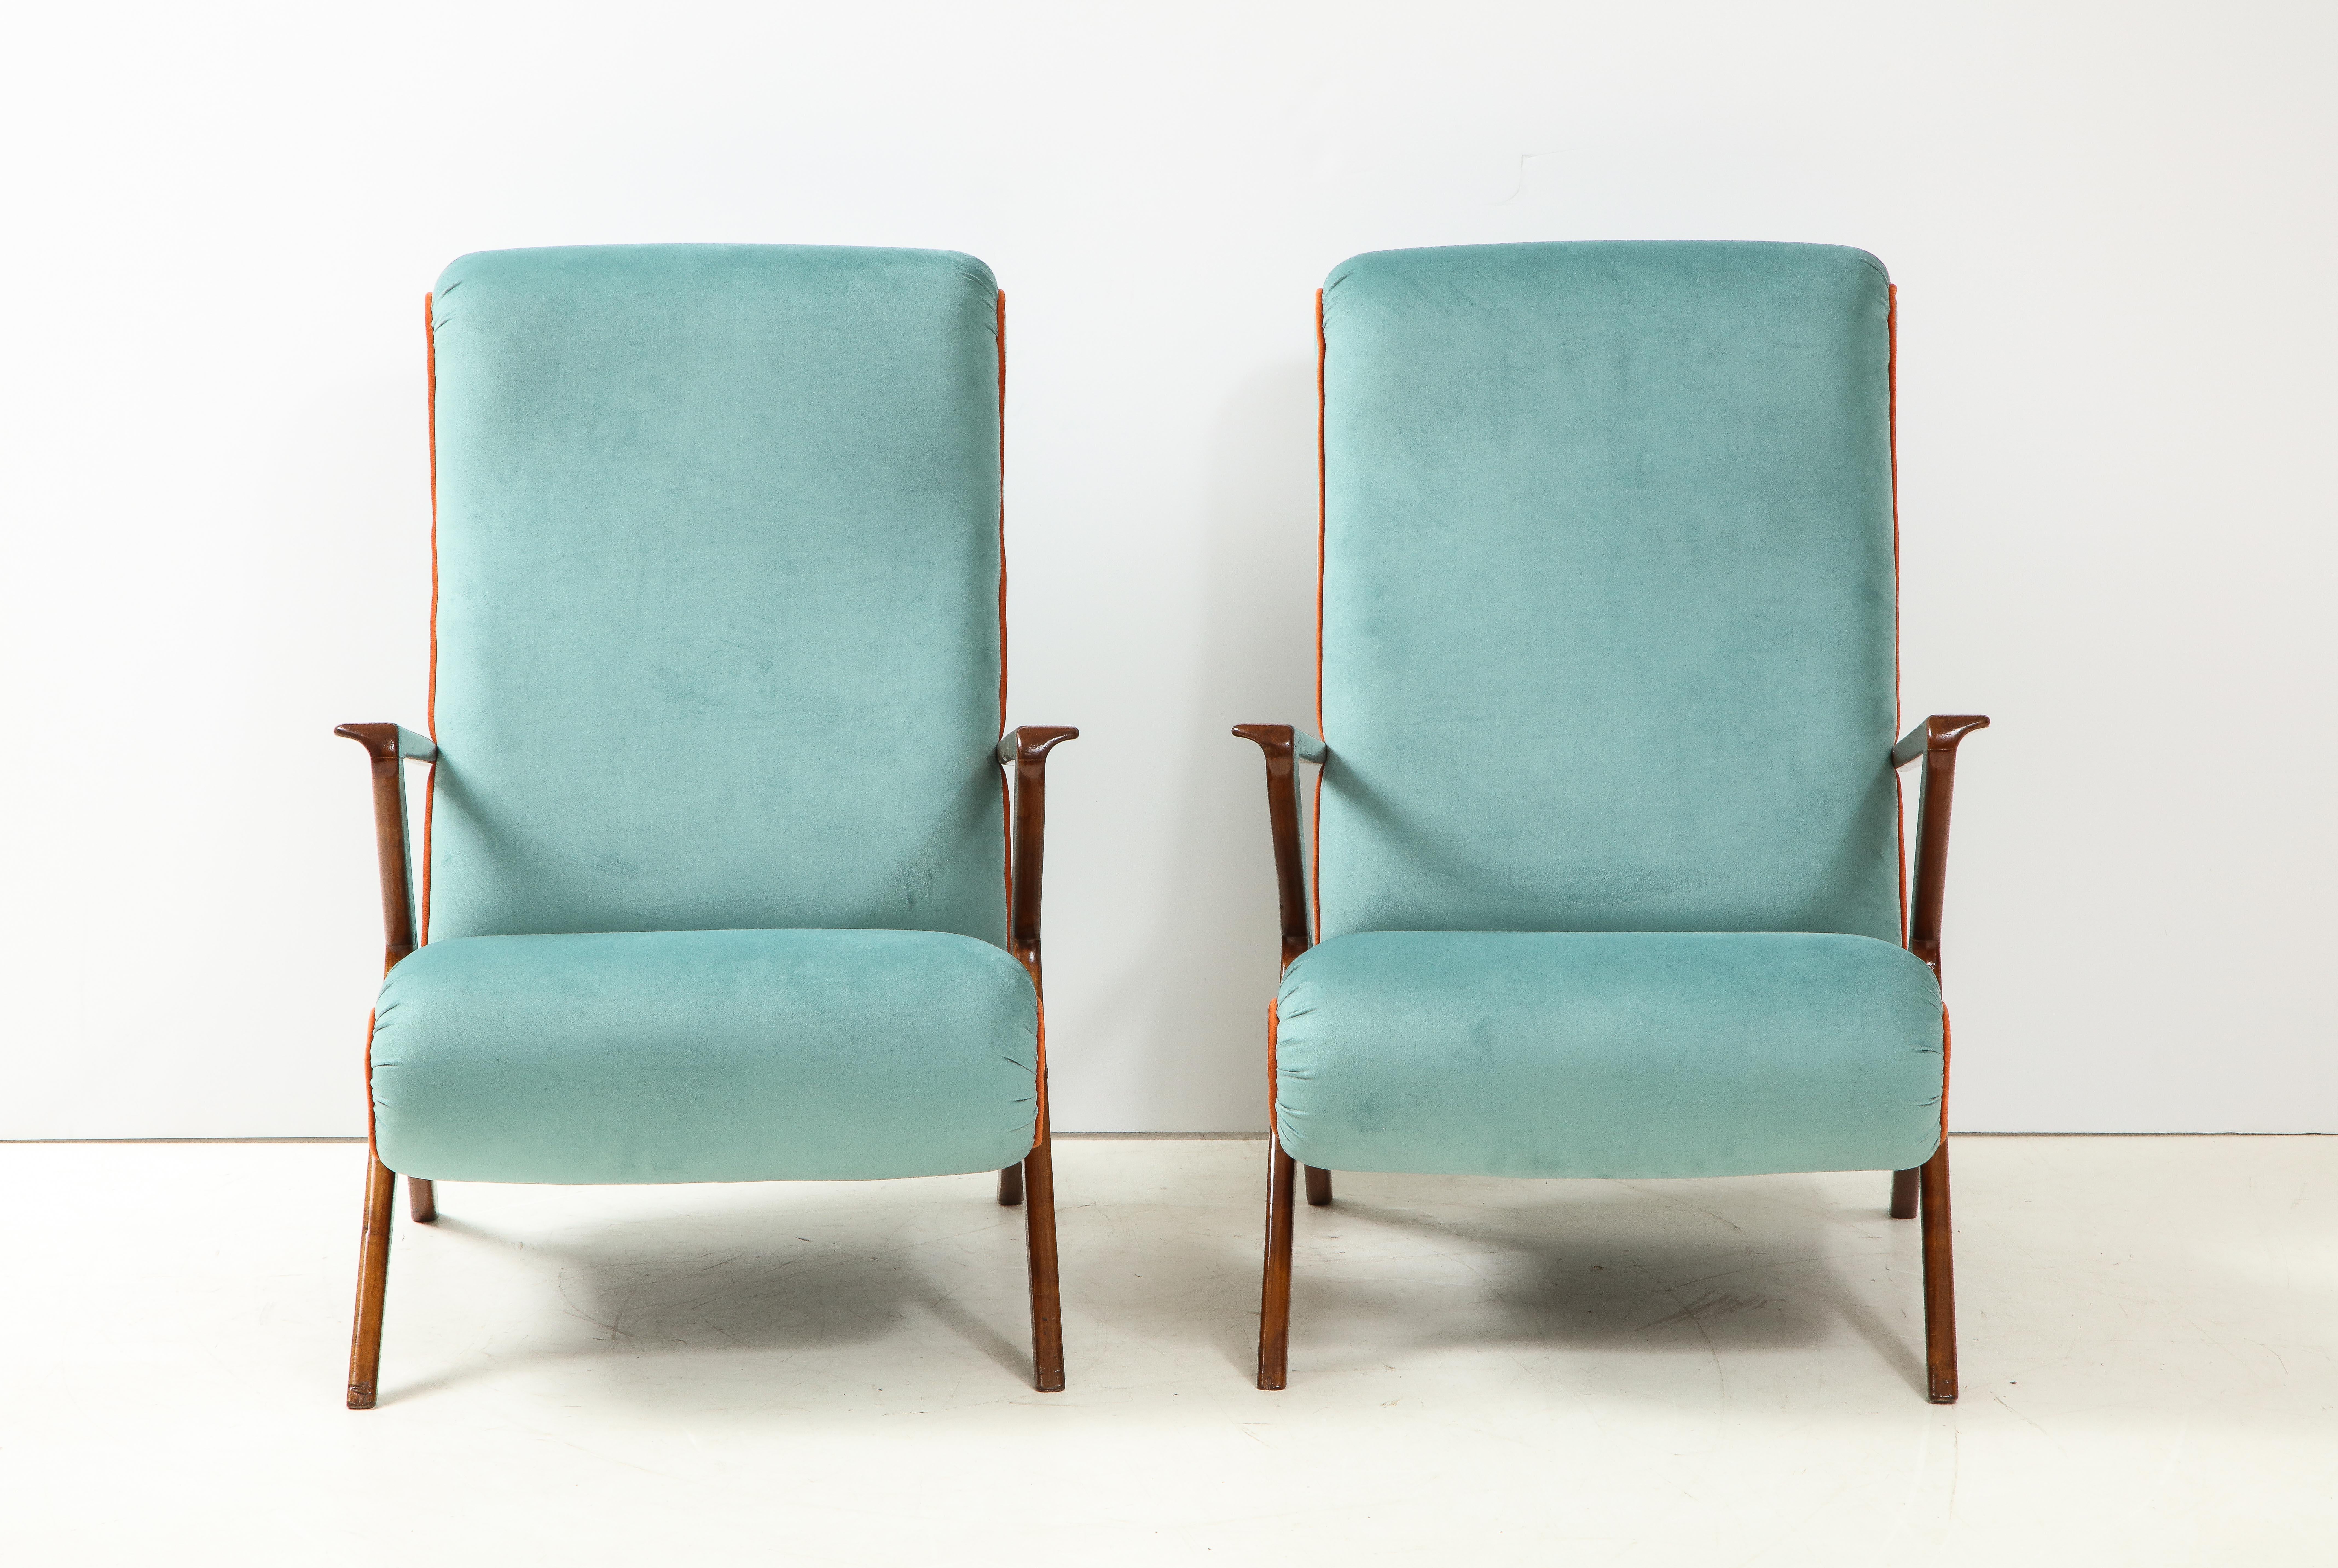 A pair of Italian 1950s sculptural walnut armchairs or lounge chairs. The chairs have fantastic sculptural angles, solid walnut frames, with brass details and are newly upholstered in an Italian soft blue ultra-suede with an apricot/orange piping.